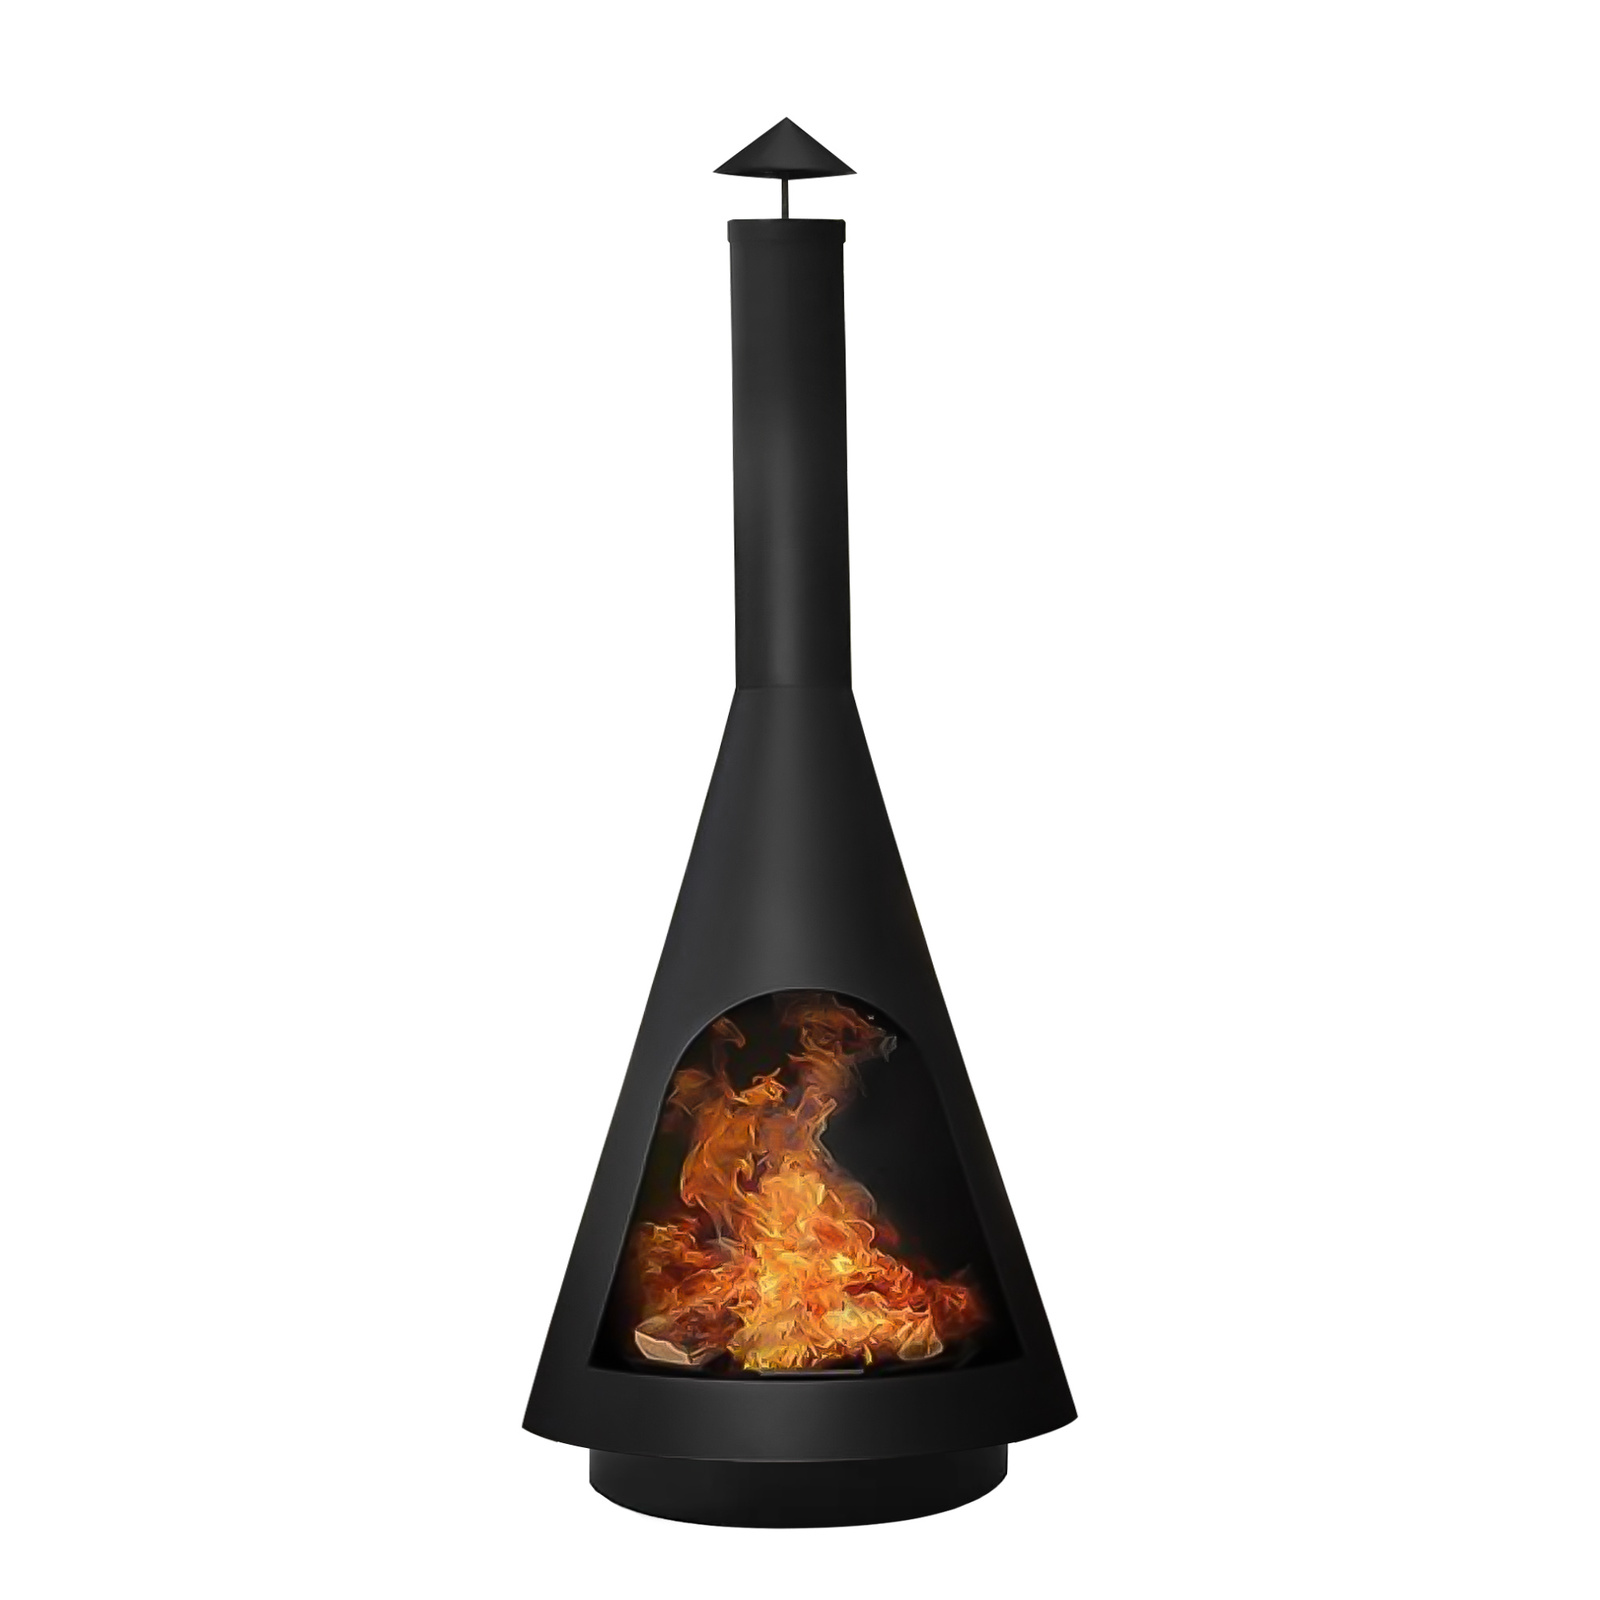 Chimney Fire Pit Patio Heater Outdoor Camping Portable Fireplace 105cm